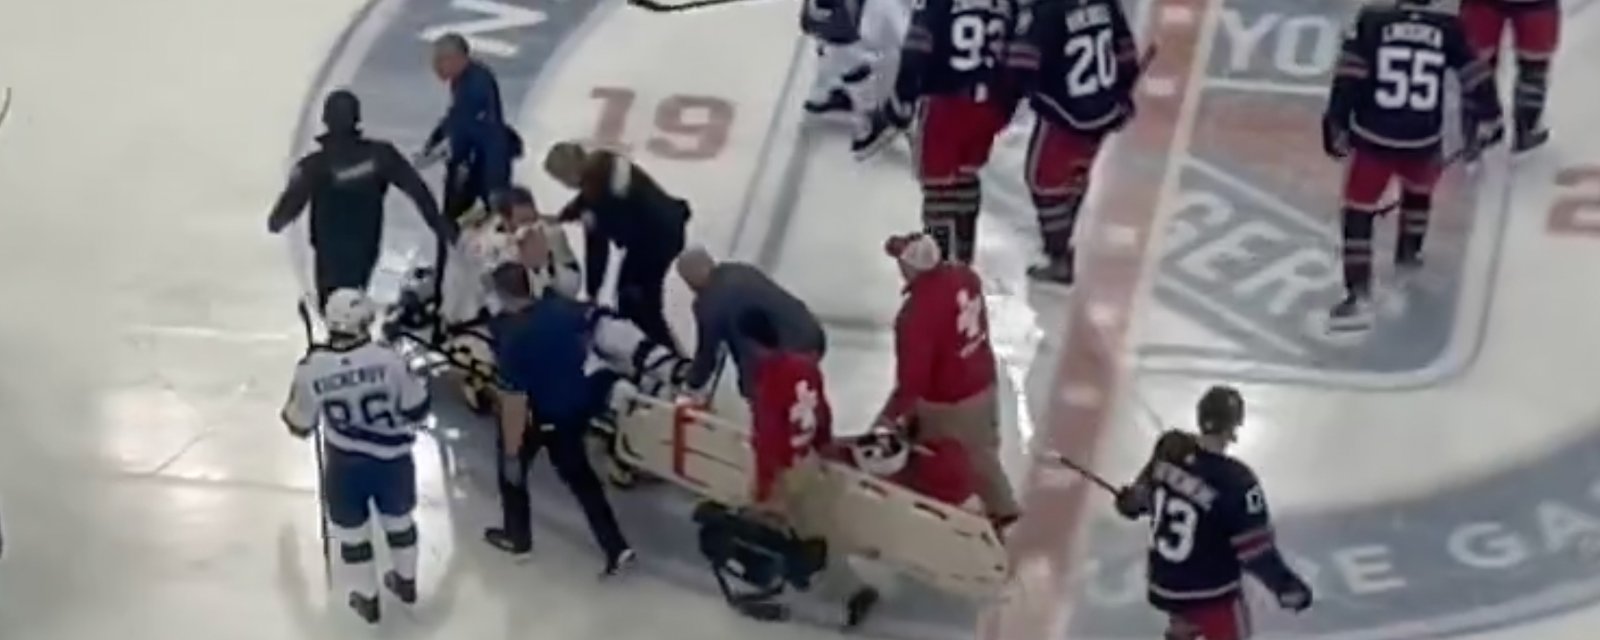 In excruciating pain, Mikhail Sergachev is carried off on stretcher in devastating incident 